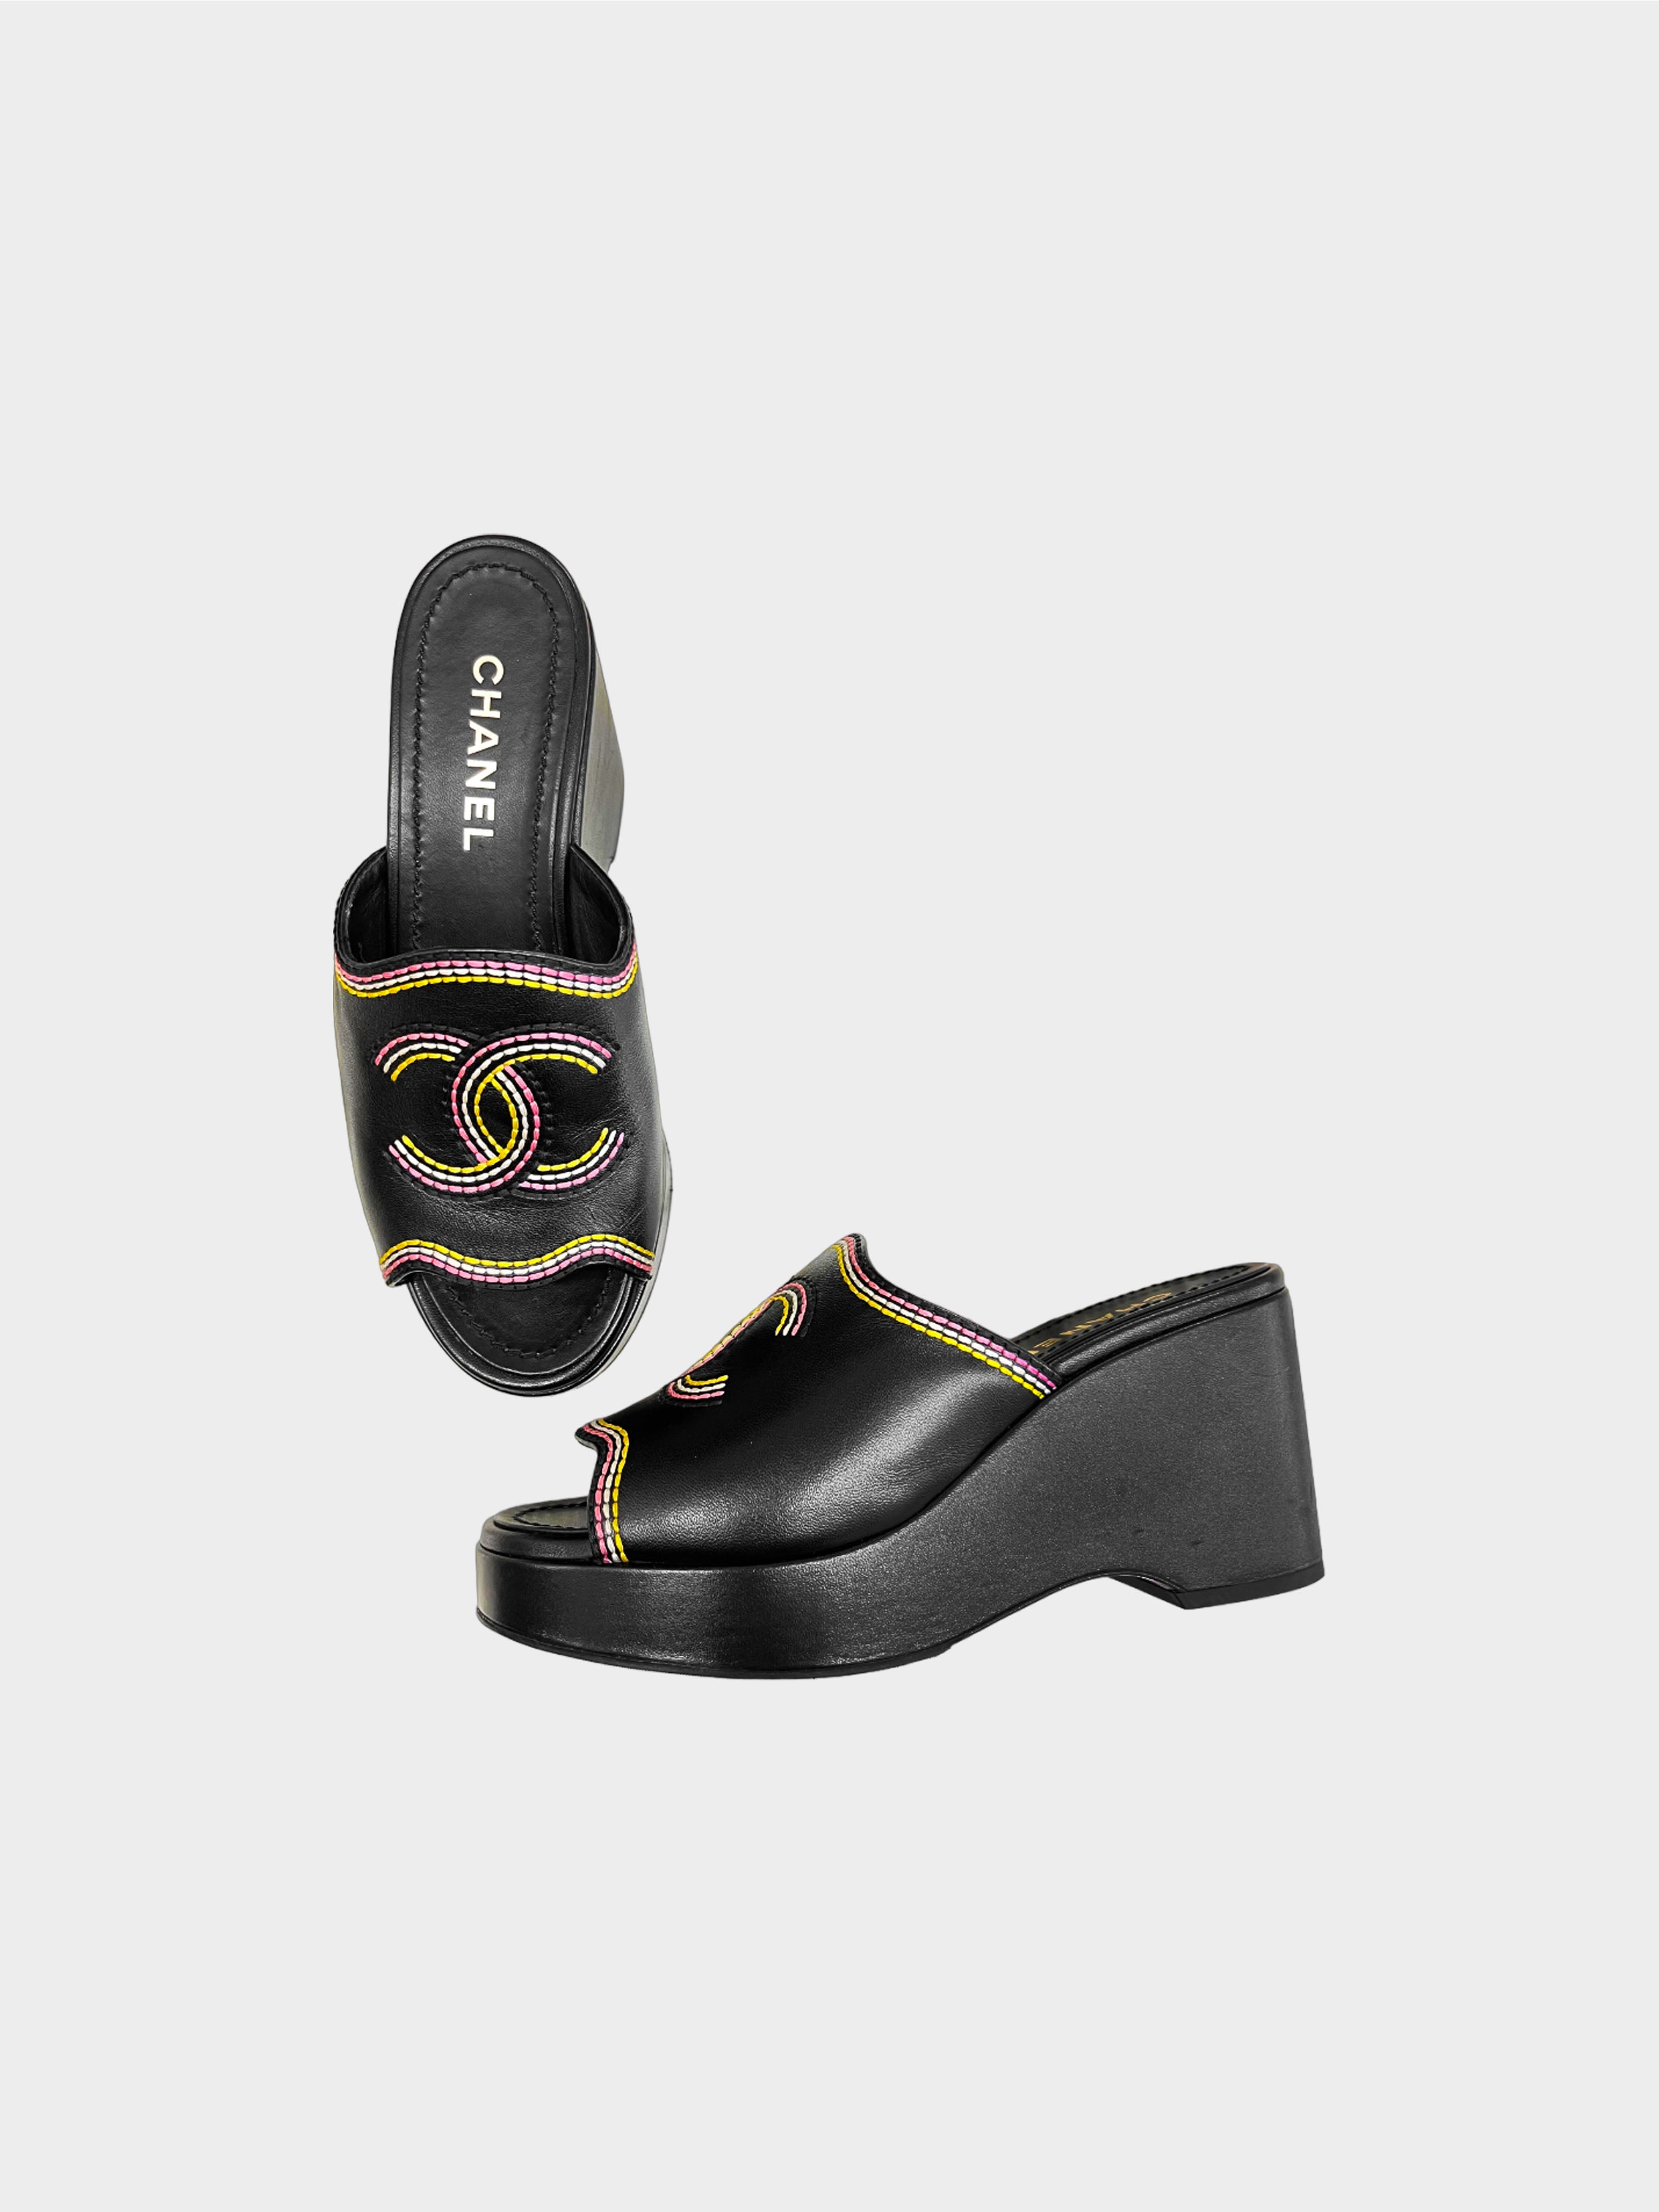 Chanel 2021 Multicolor Stitched CC Wedge Mules